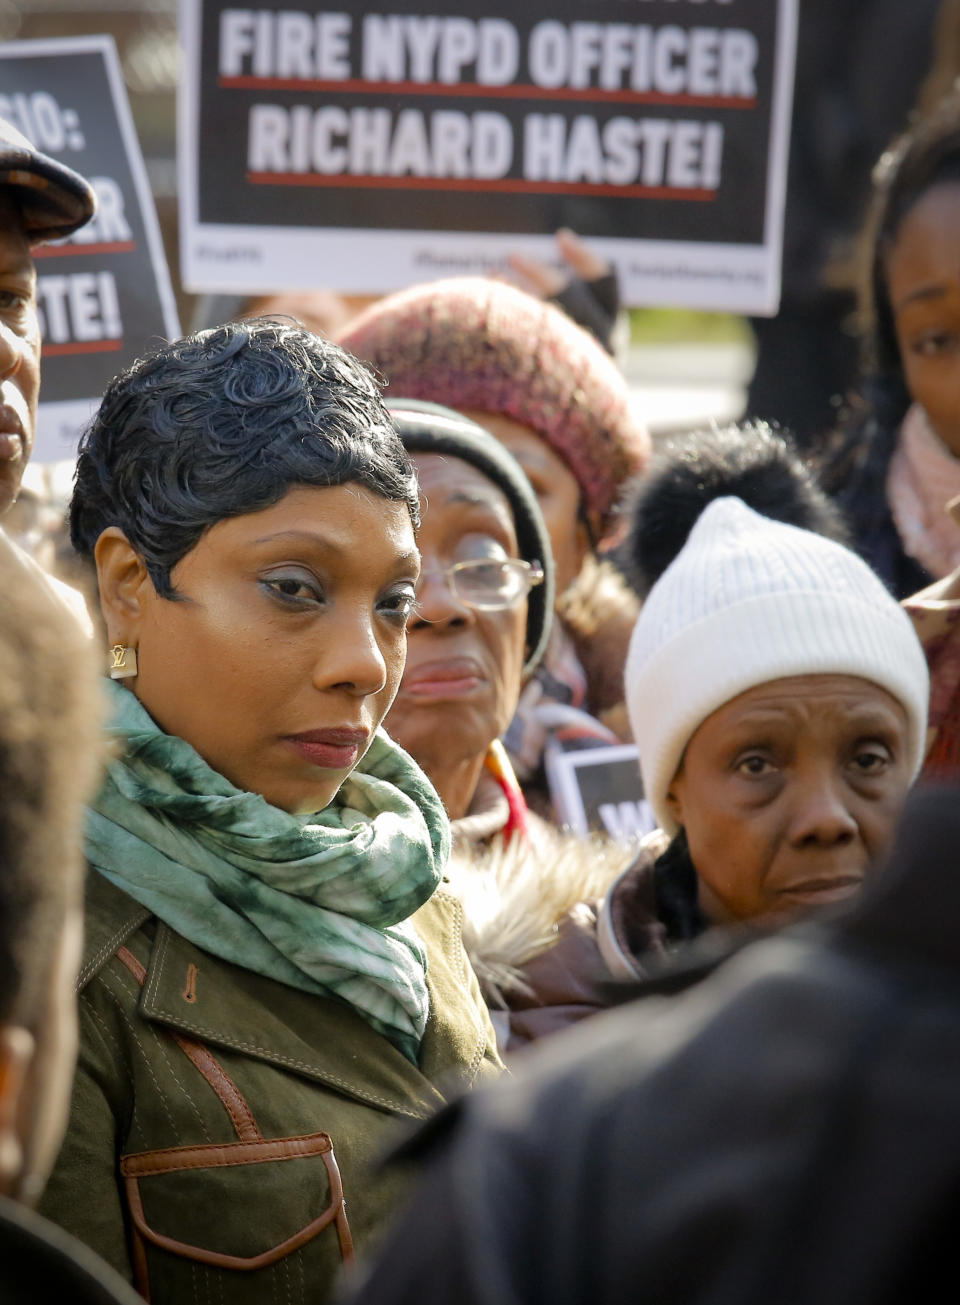 Political officials, civil rights activists and families of police shooting victims, join Constance Malcolm, left, mother of Ramarley Graham, and family members at a press conference outside police headquarters, Thursday Jan. 19, 2017, in New York. A disciplinary trial is underway for NYPD officer Richard Haste, who shot and killed the unarmed 18-year-old Graham in the bathroom of his New York City apartment. (AP Photo/Bebeto Matthews)